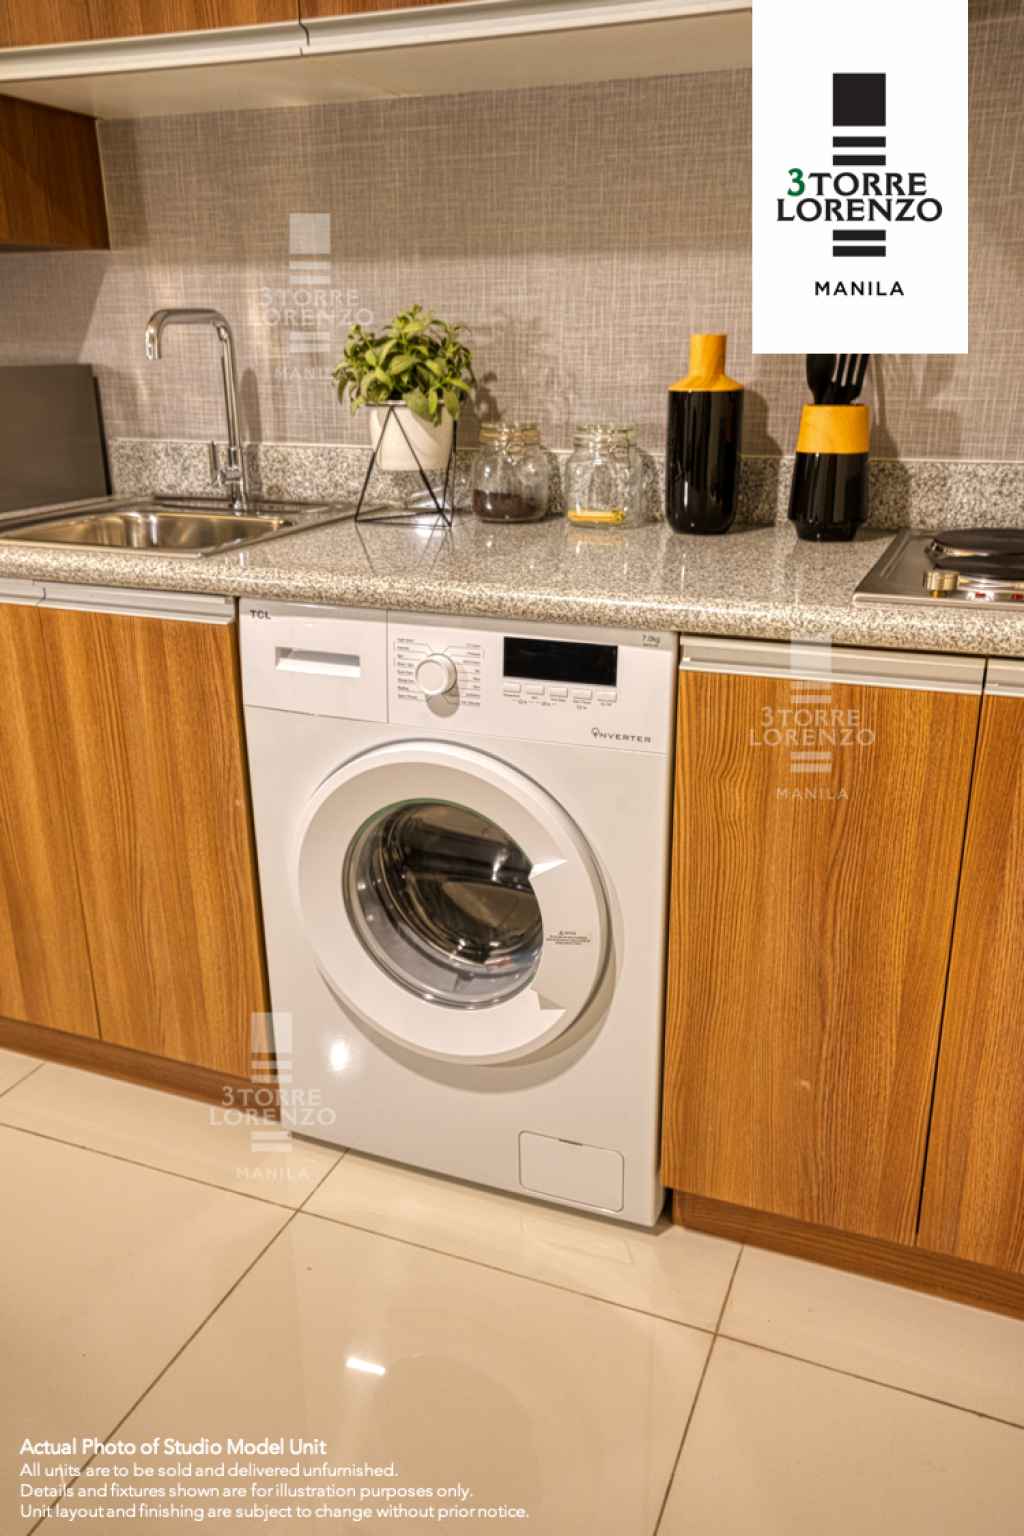 a kitchenette equipped with washing machine at 3Torre Lorenzo